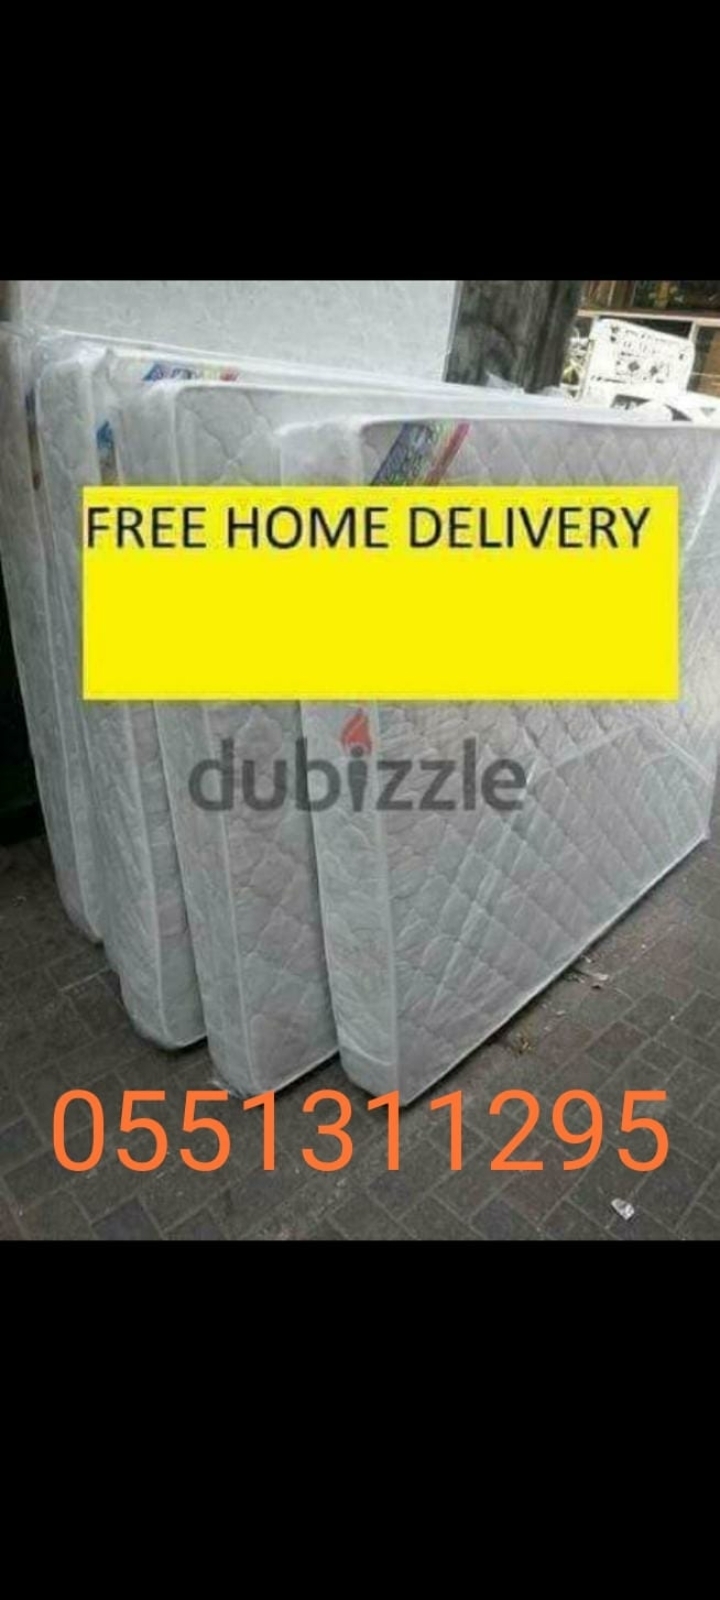 I will Saling brand new mattress all size available